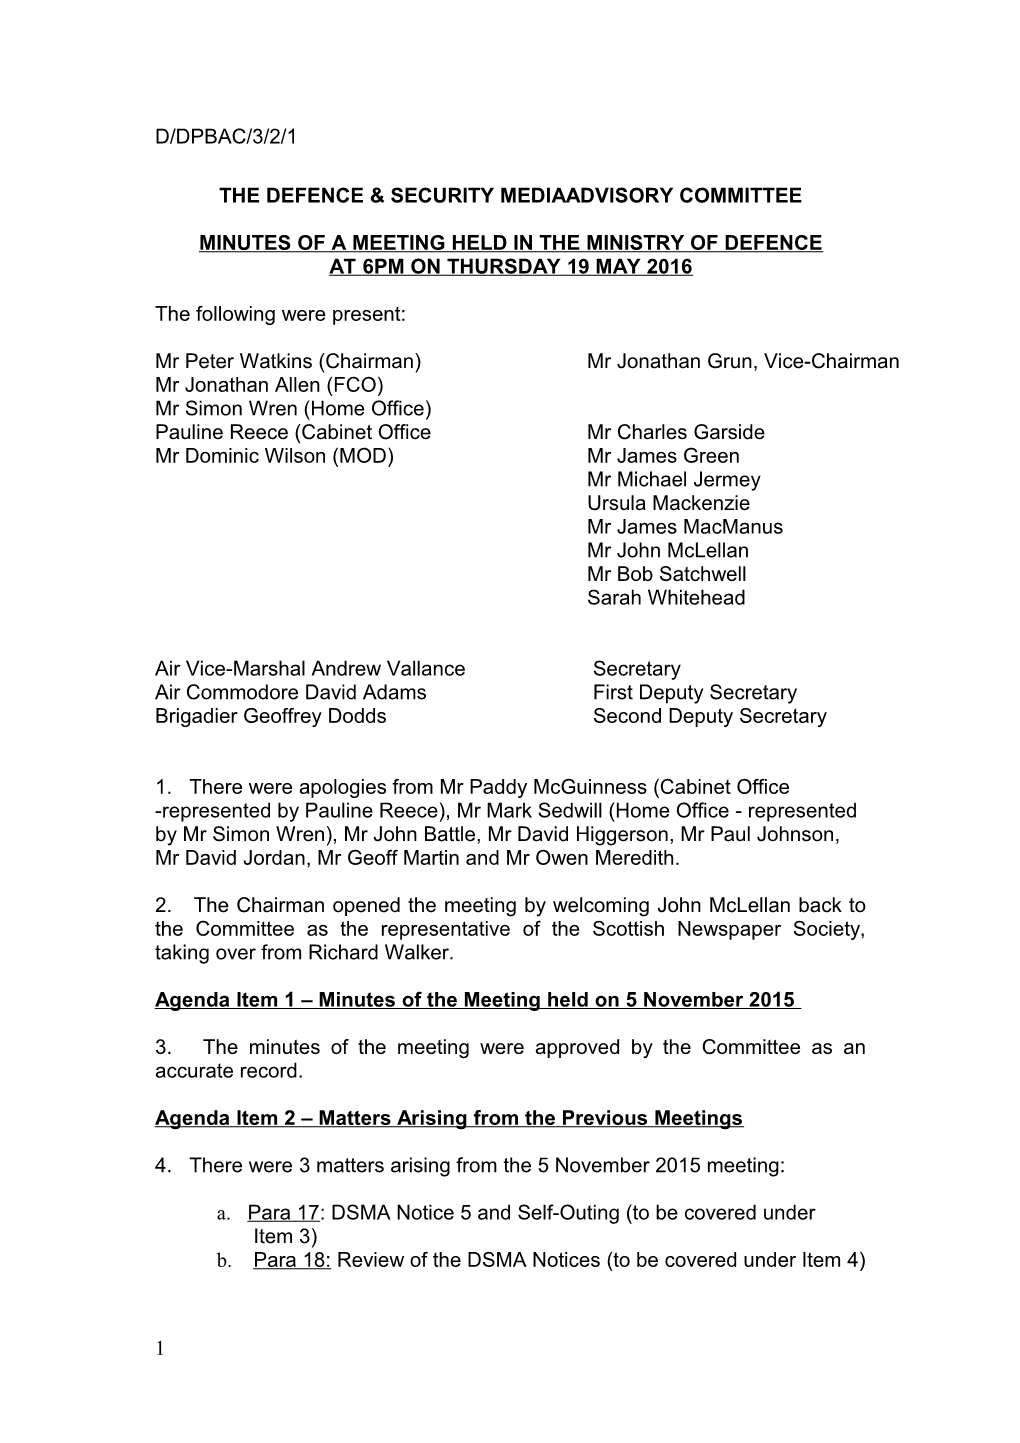 The Defence & Security Mediaadvisory Committee